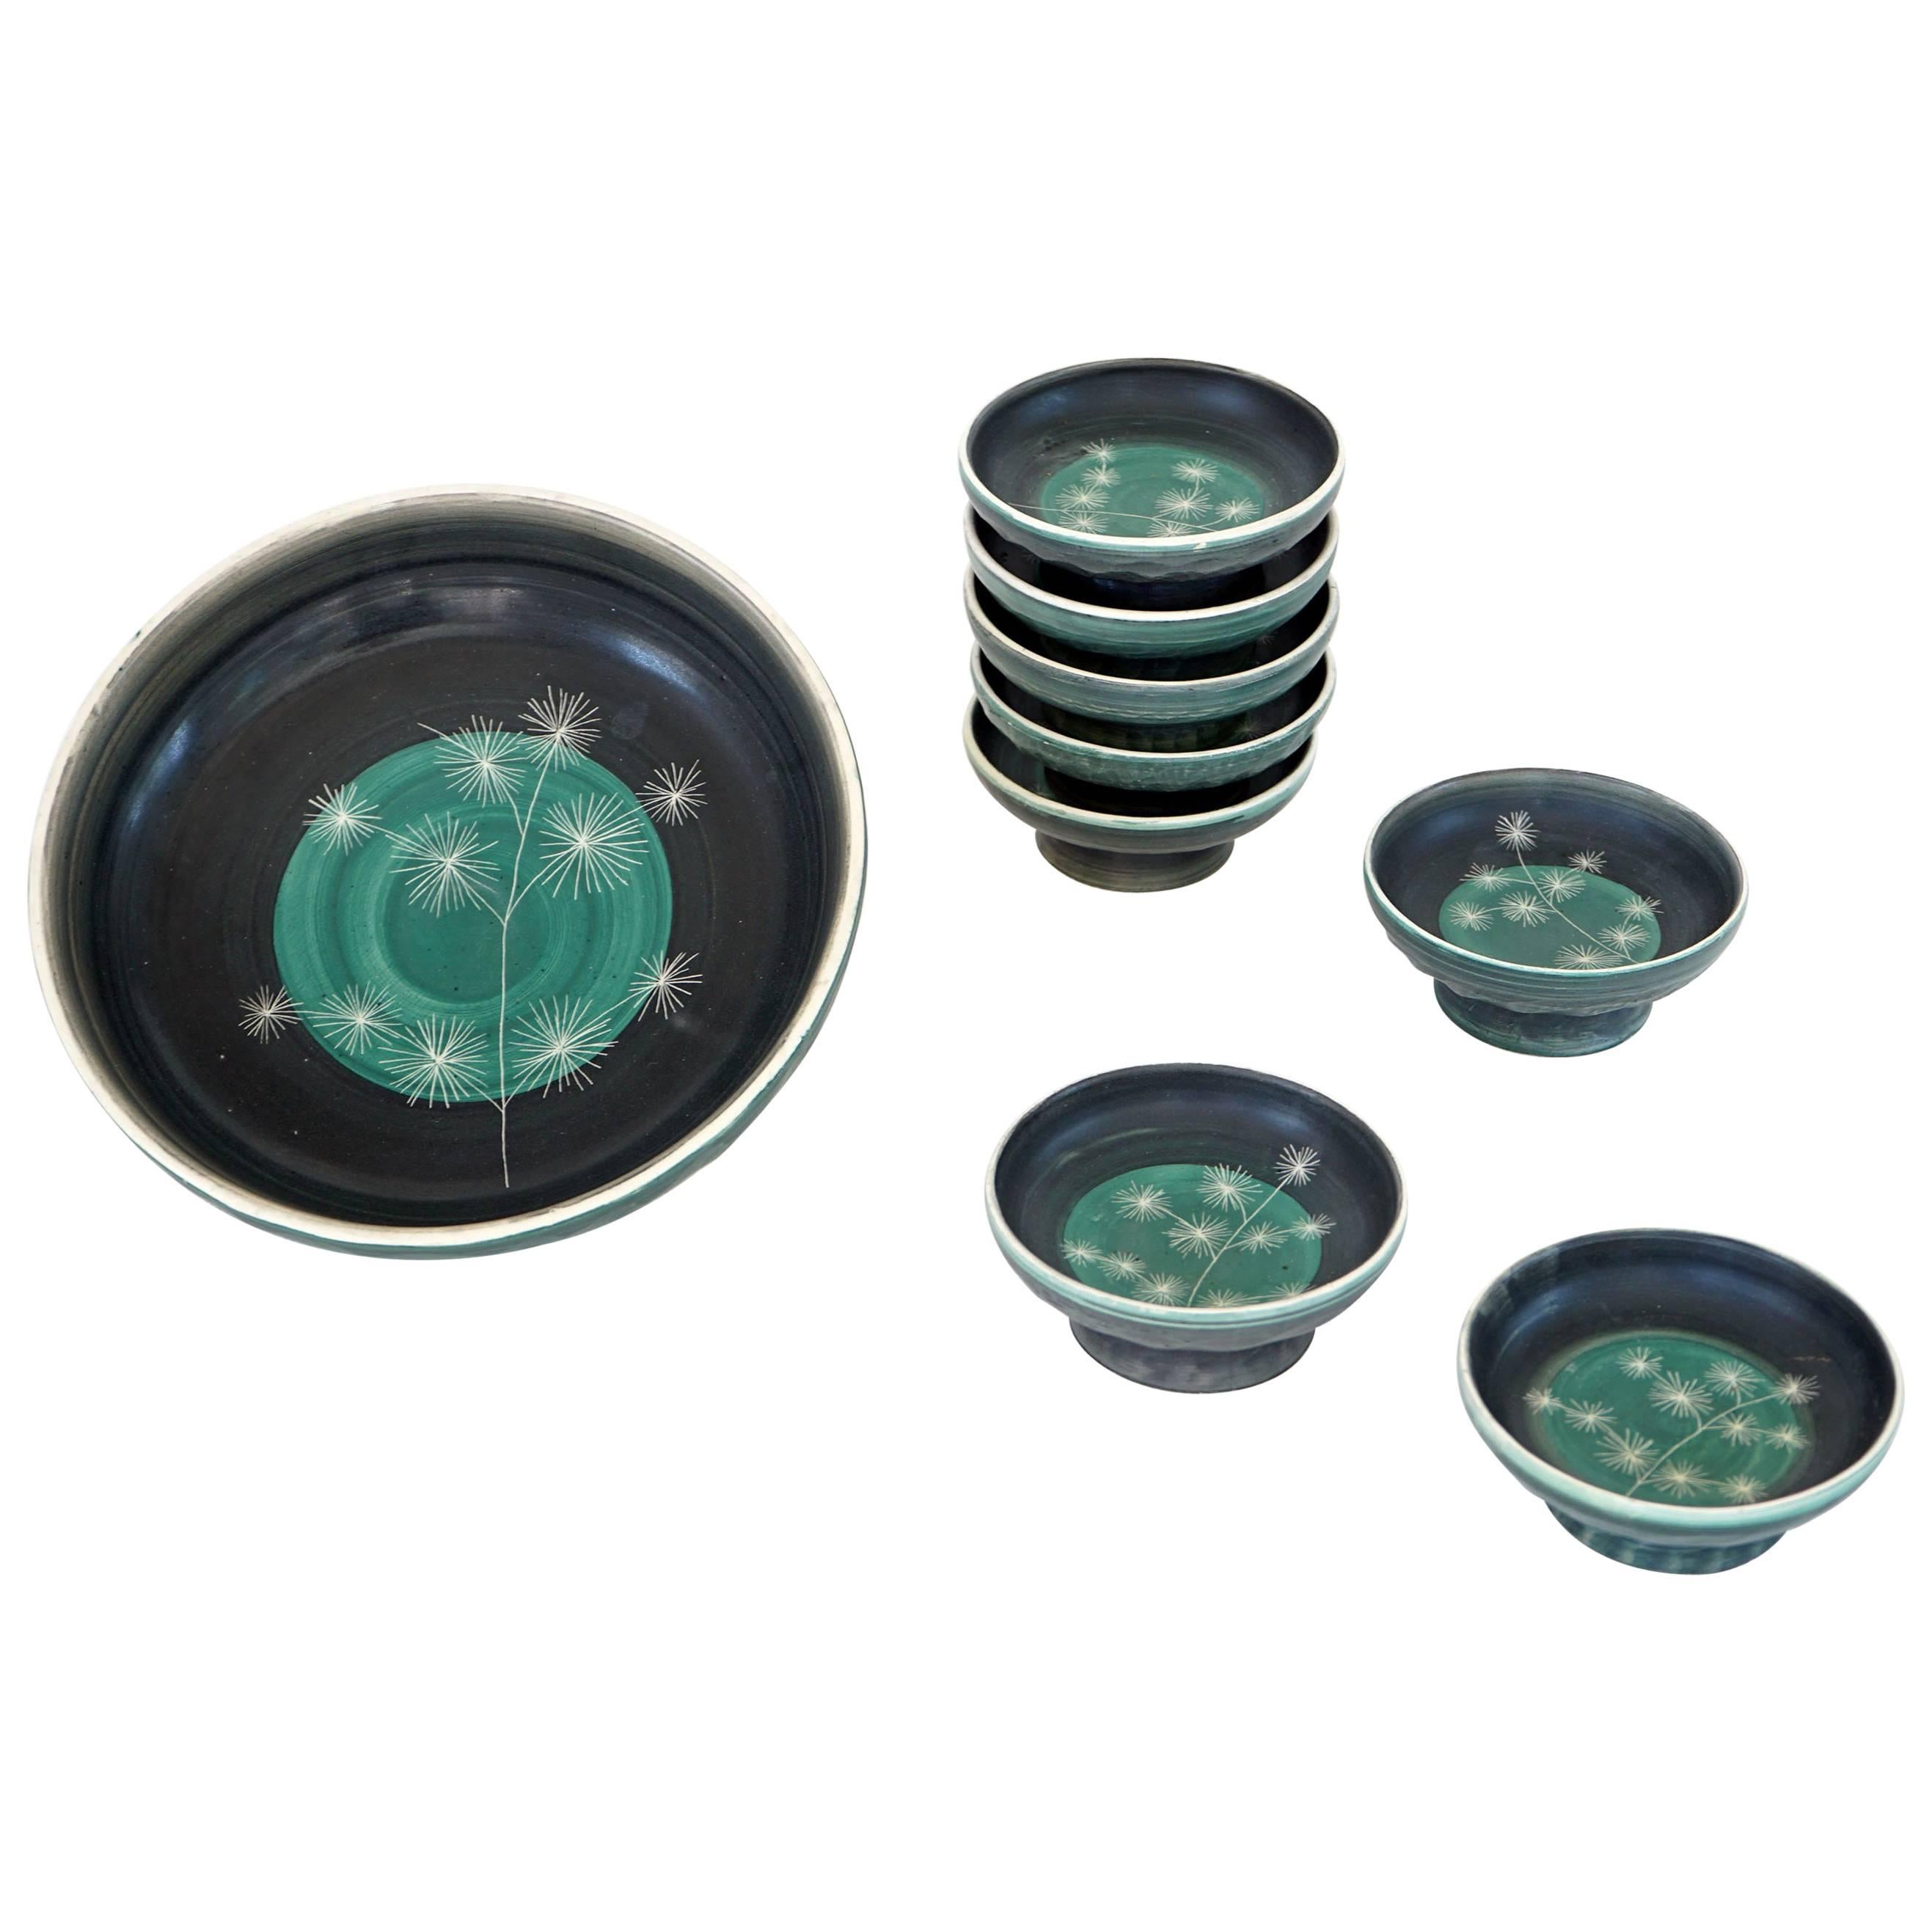 Set of Handmade Ceramic Bowls by Tapis Vert in Vallauris, 1950s For Sale